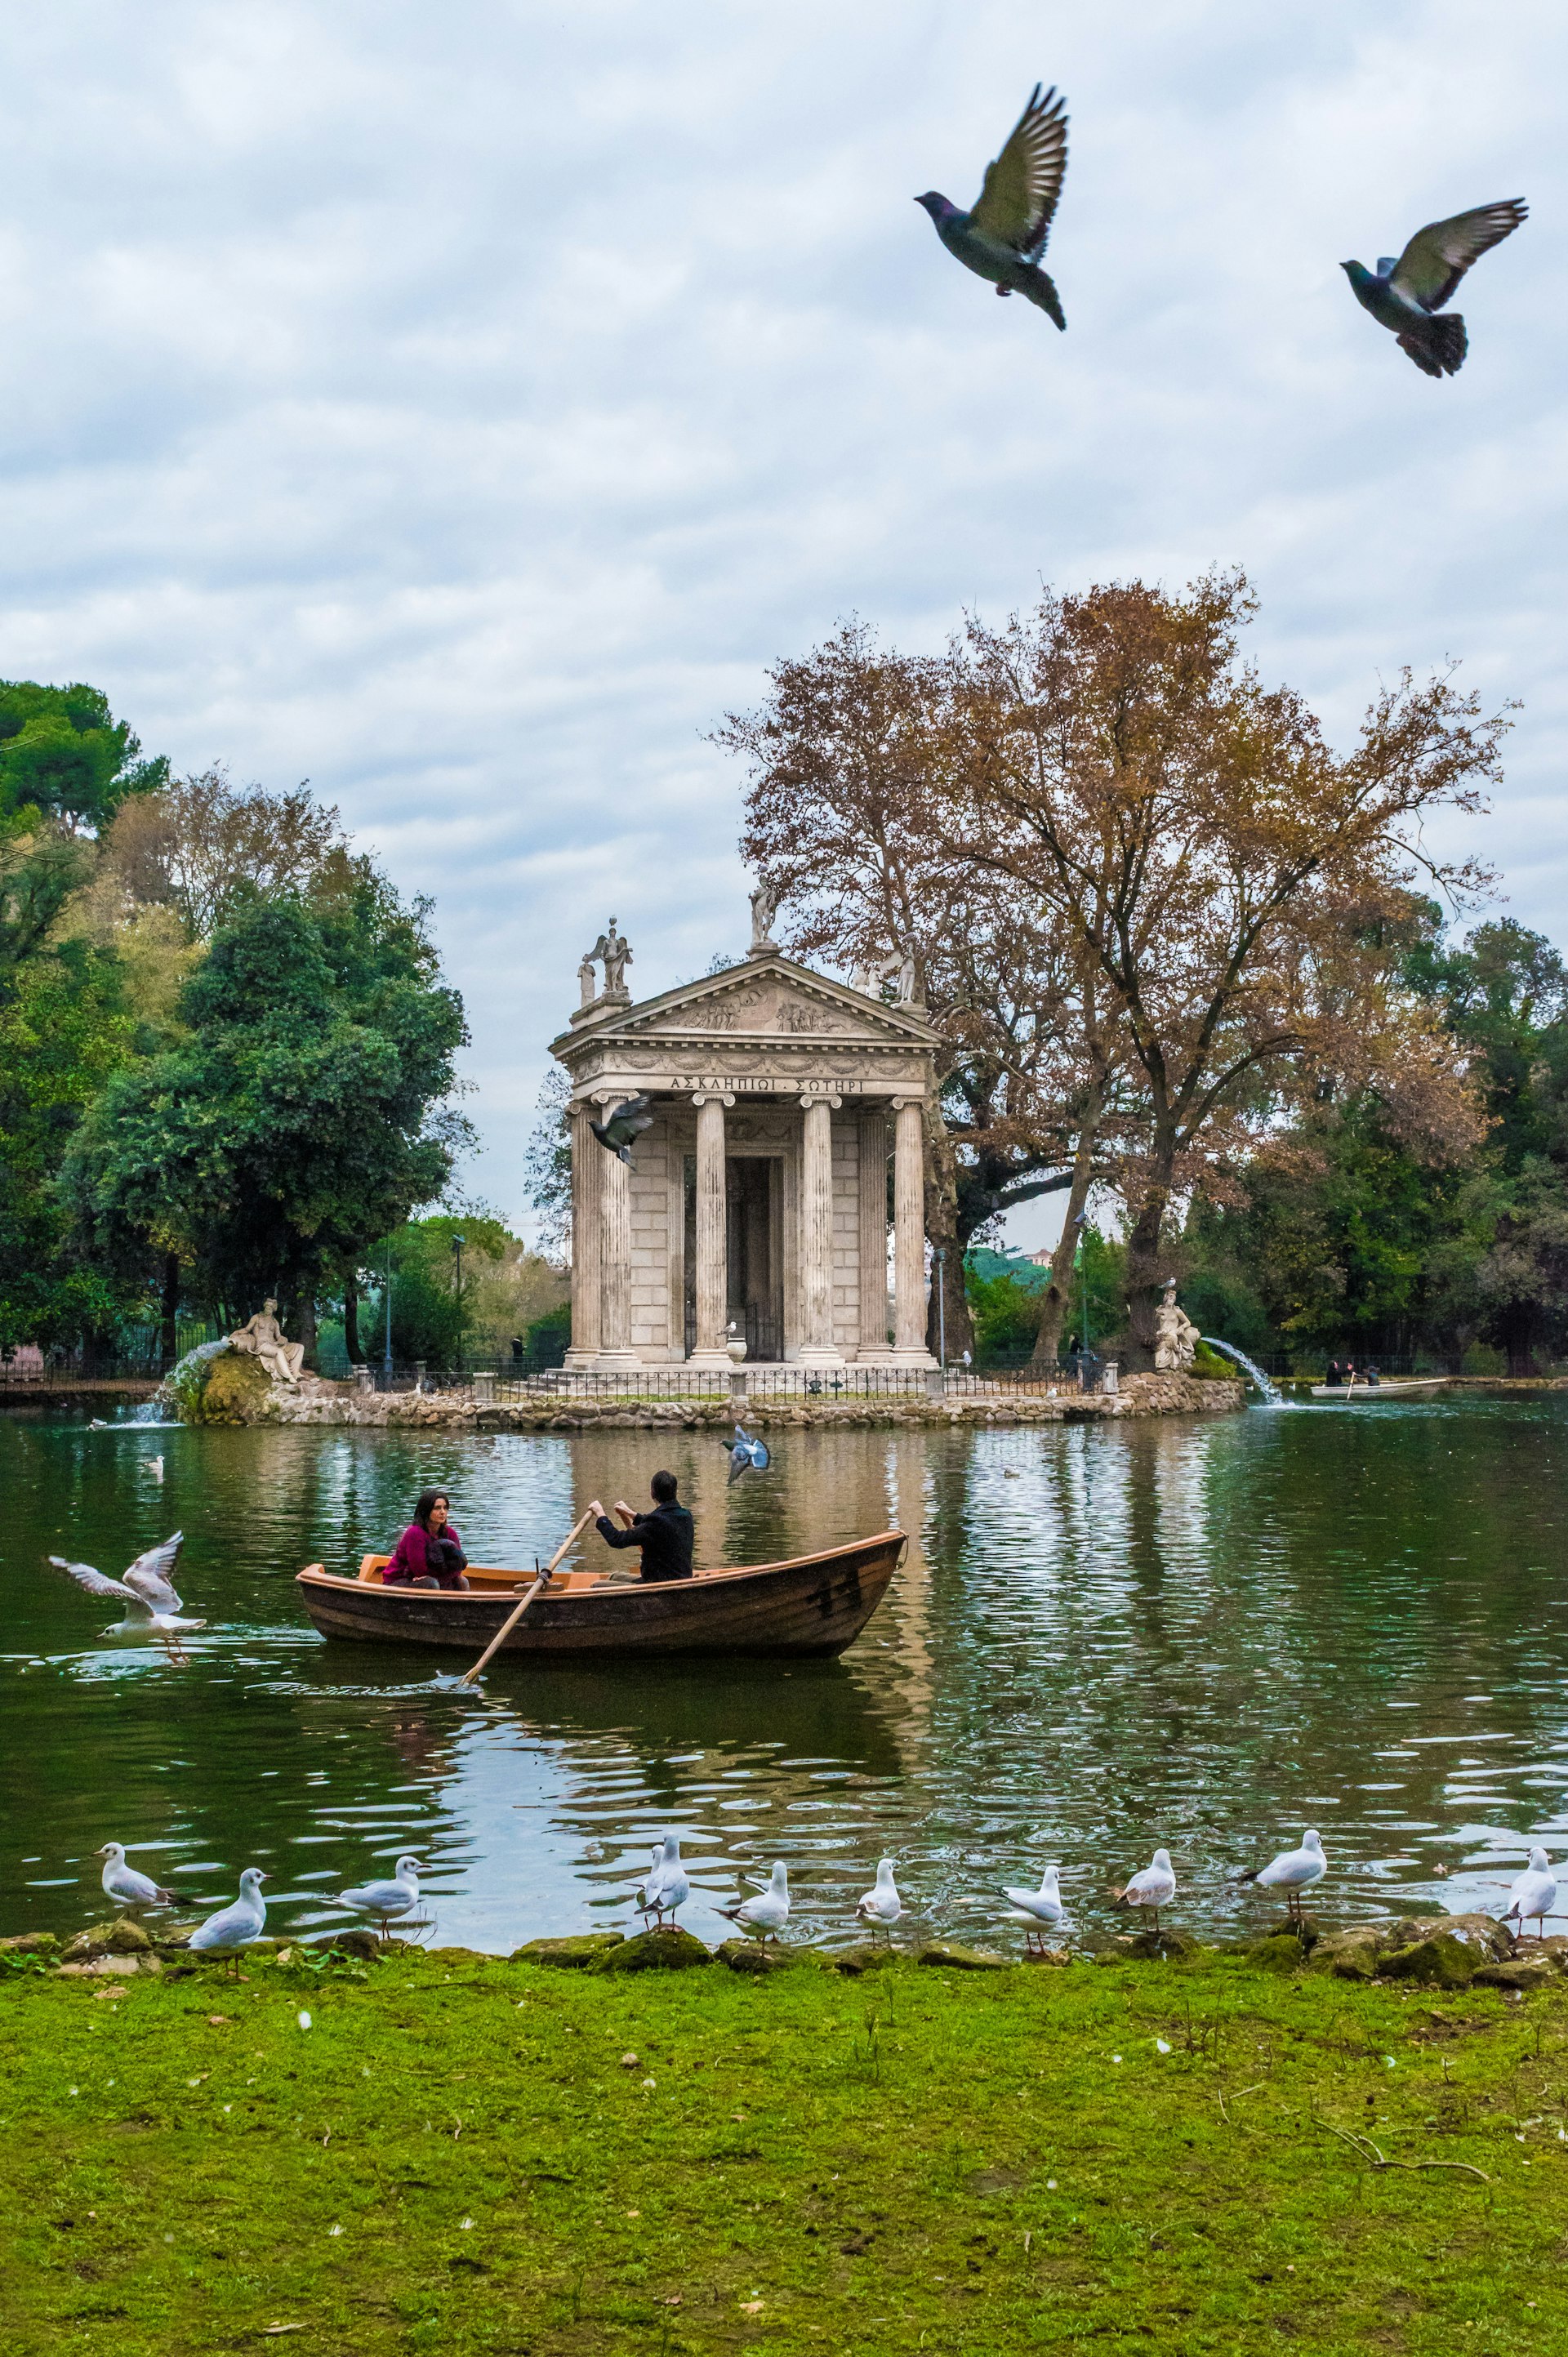 Two people enjoy a canoe ride on a lake in Villa Borghese park. 